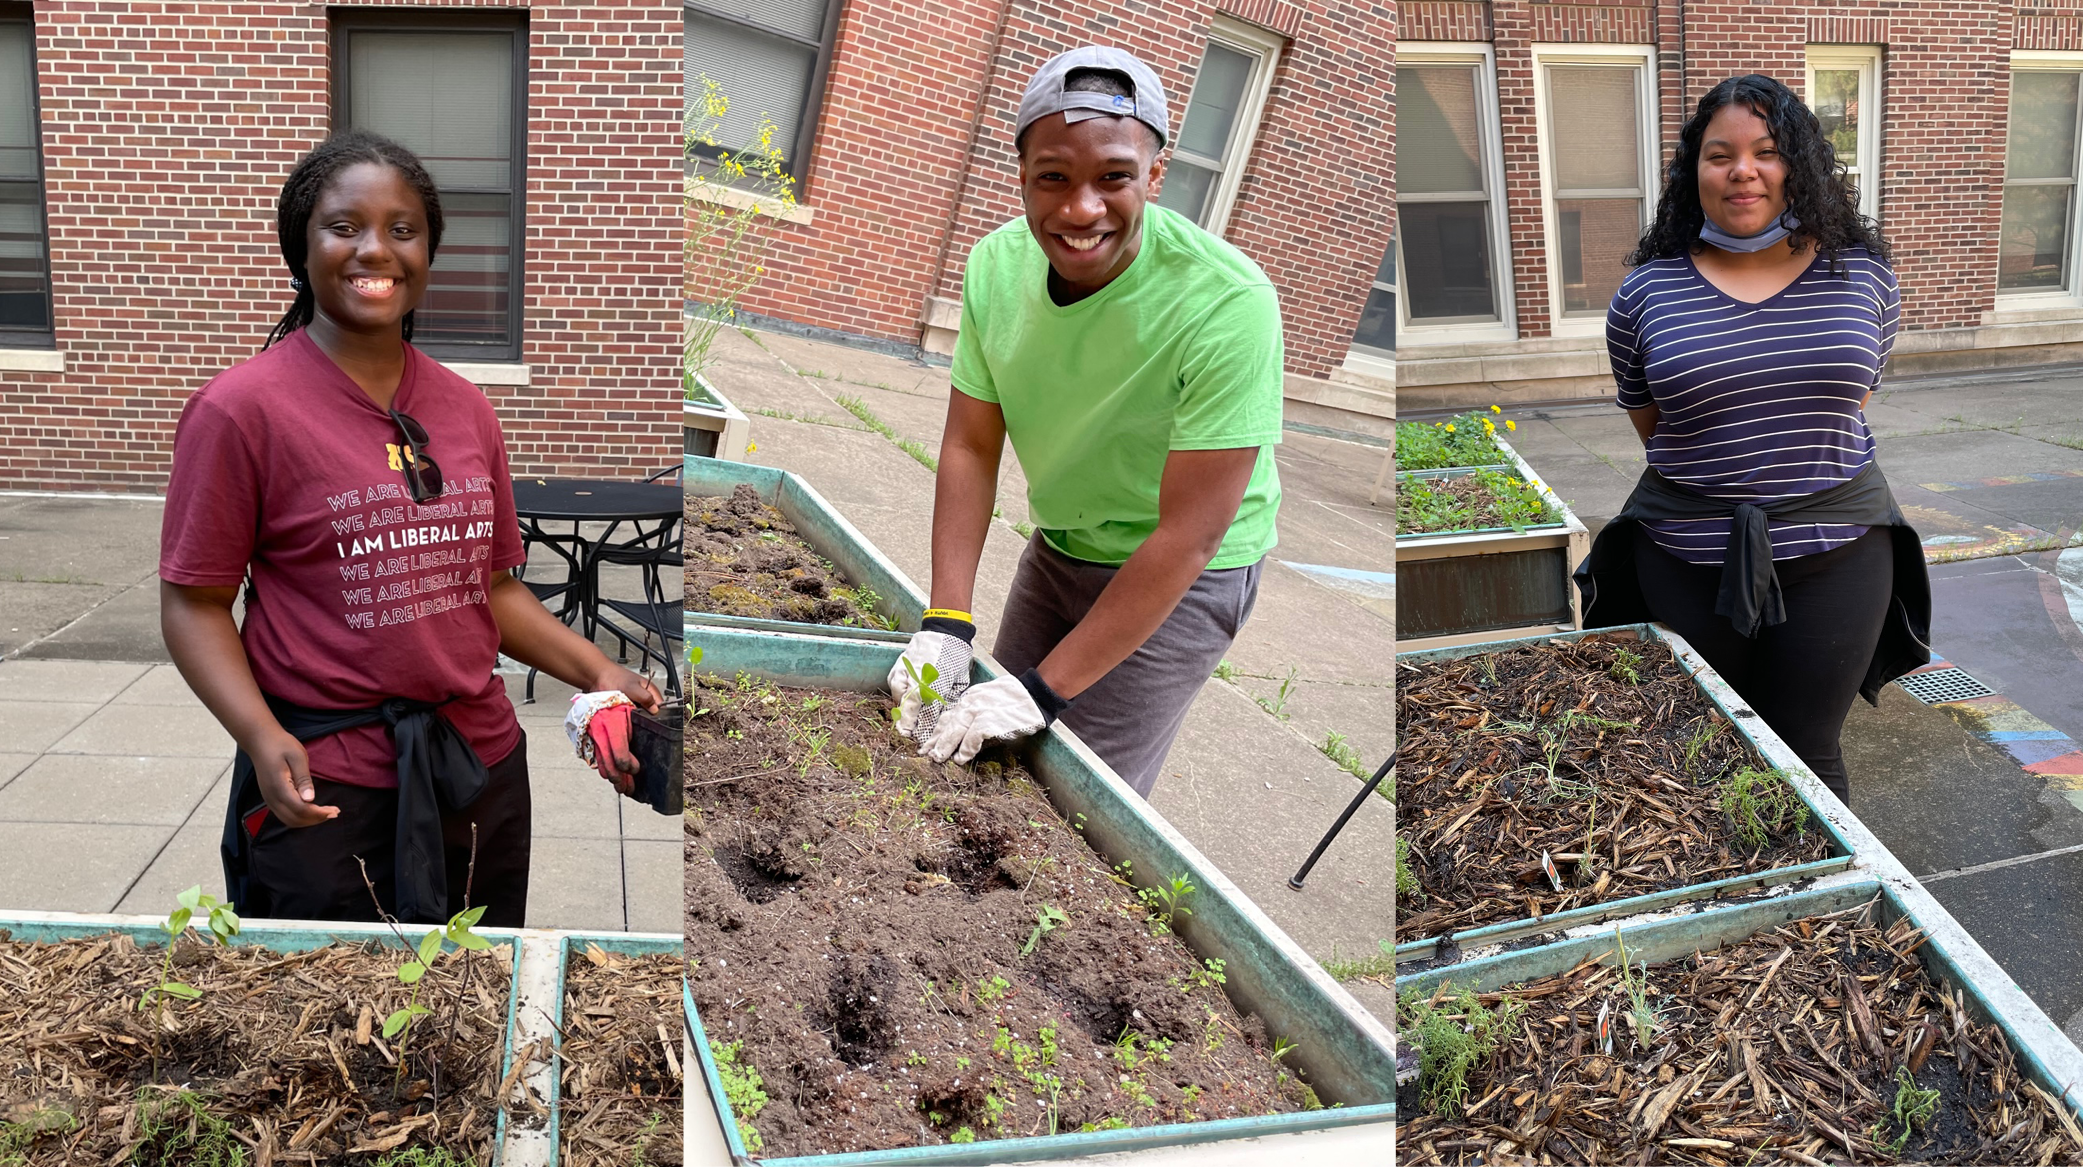 Image of U of M students gardening in a campus space.